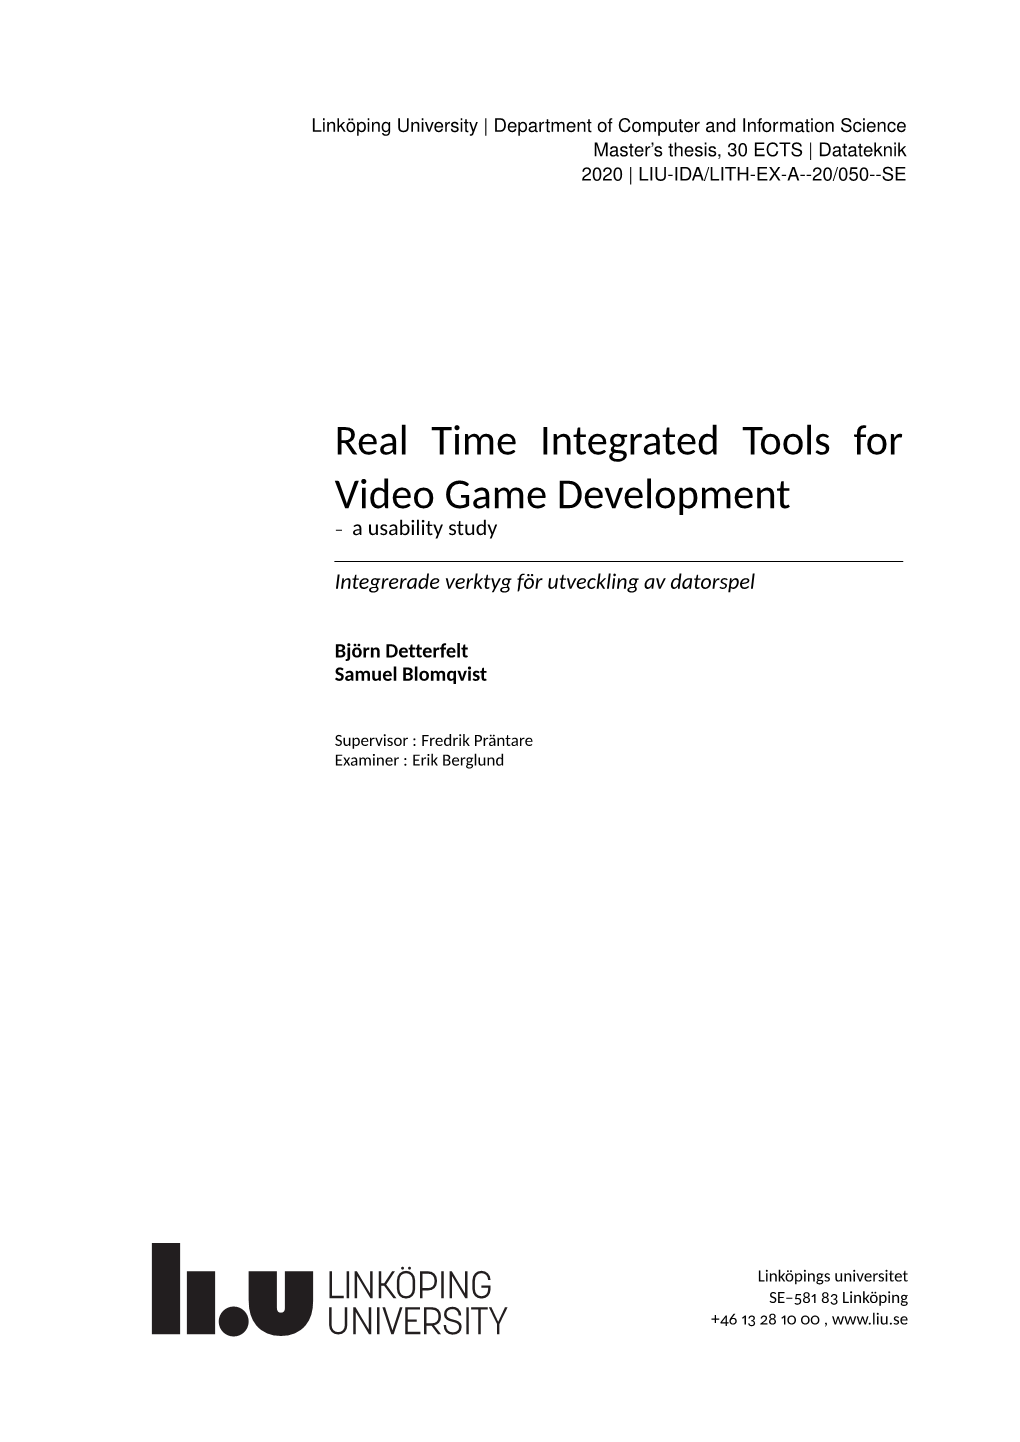 Real Time Integrated Tools for Video Game Development – a Usability Study